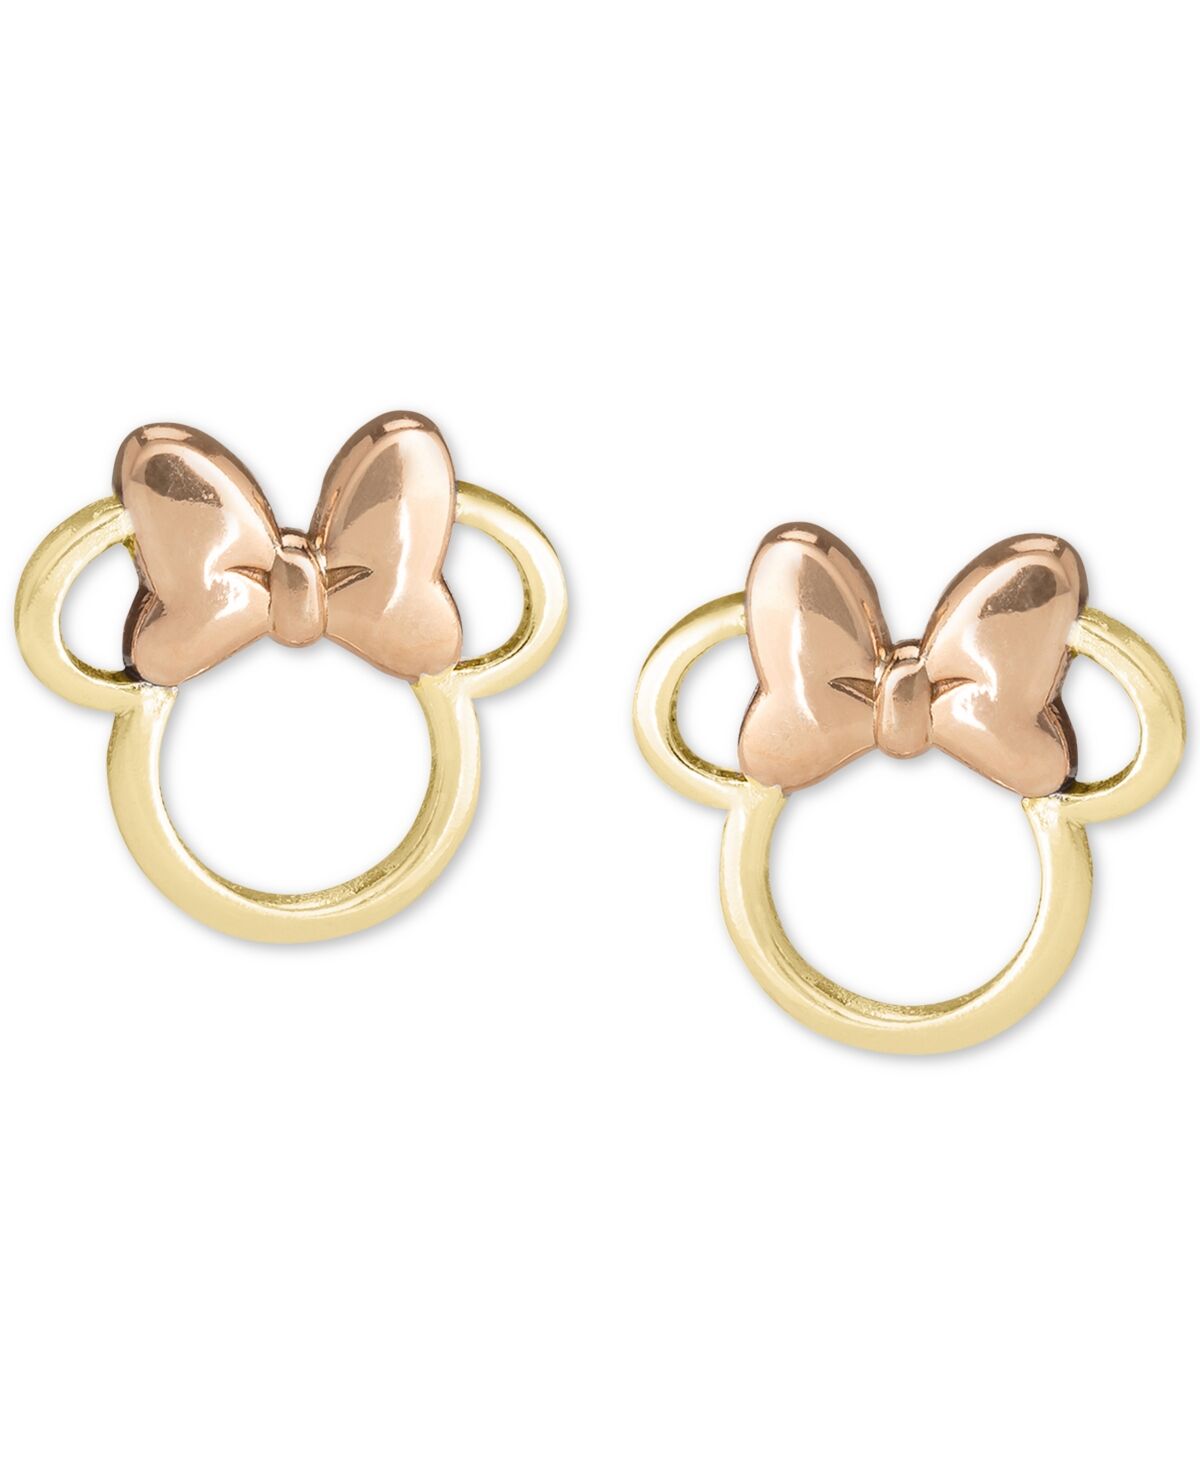 Disney Children's Minnie Mouse Silhouette Stud Earrings in 14k Gold & Rose Gold - Gold